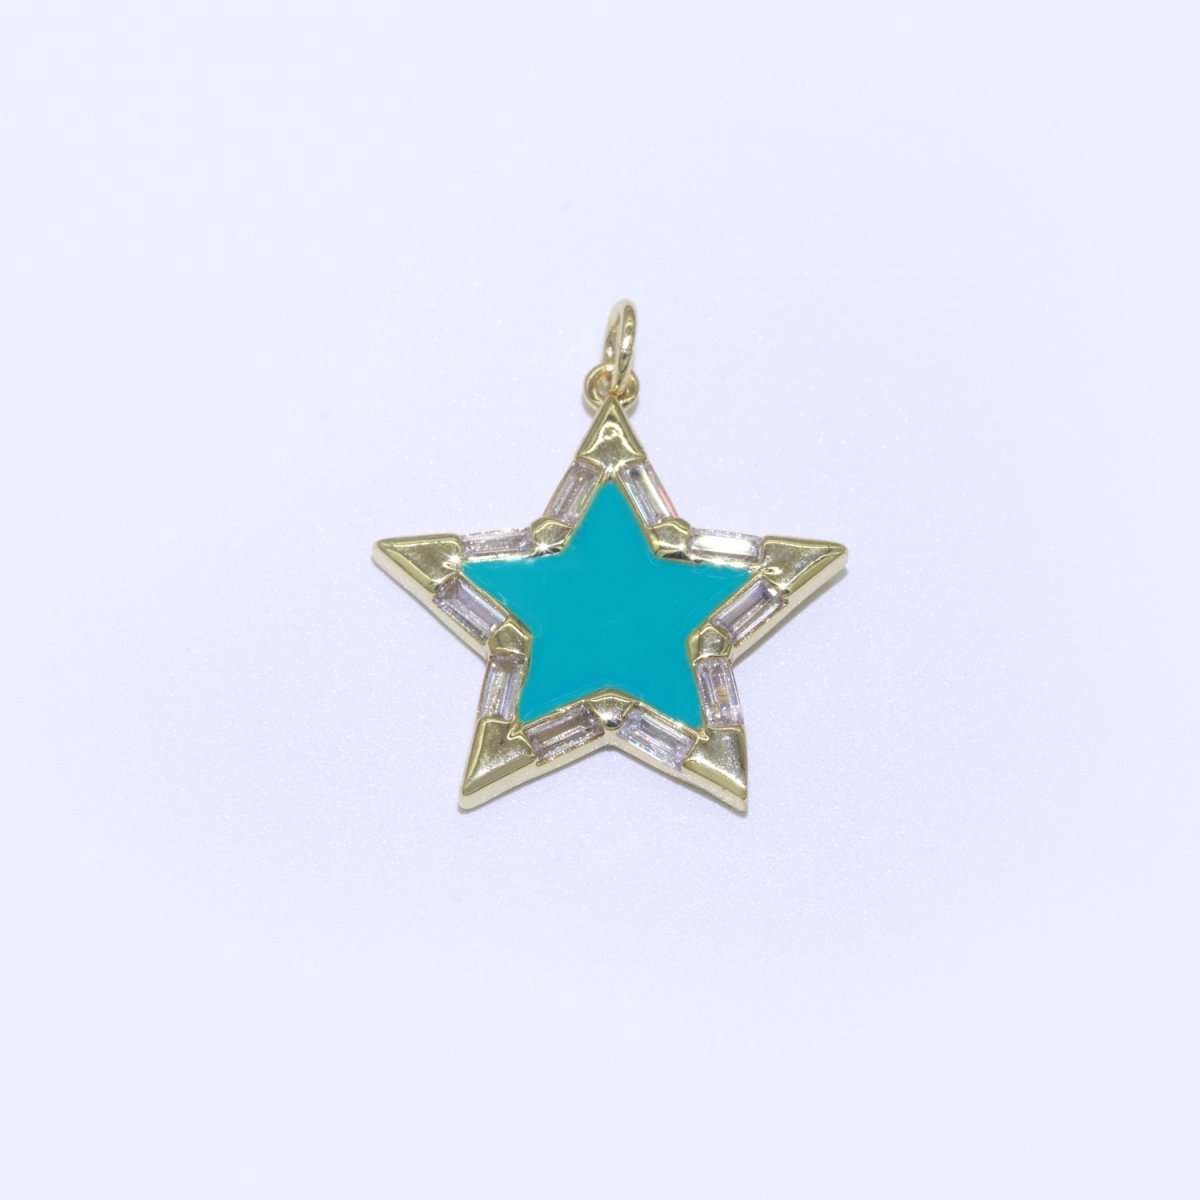 Colorful Enamel Star Charm Pendant, Red Yellow Pink Green Blue Enamel Cubic Pendant, 14K gold Filled Celestial Jewelry Making Supply M-325-M-335 - DLUXCA